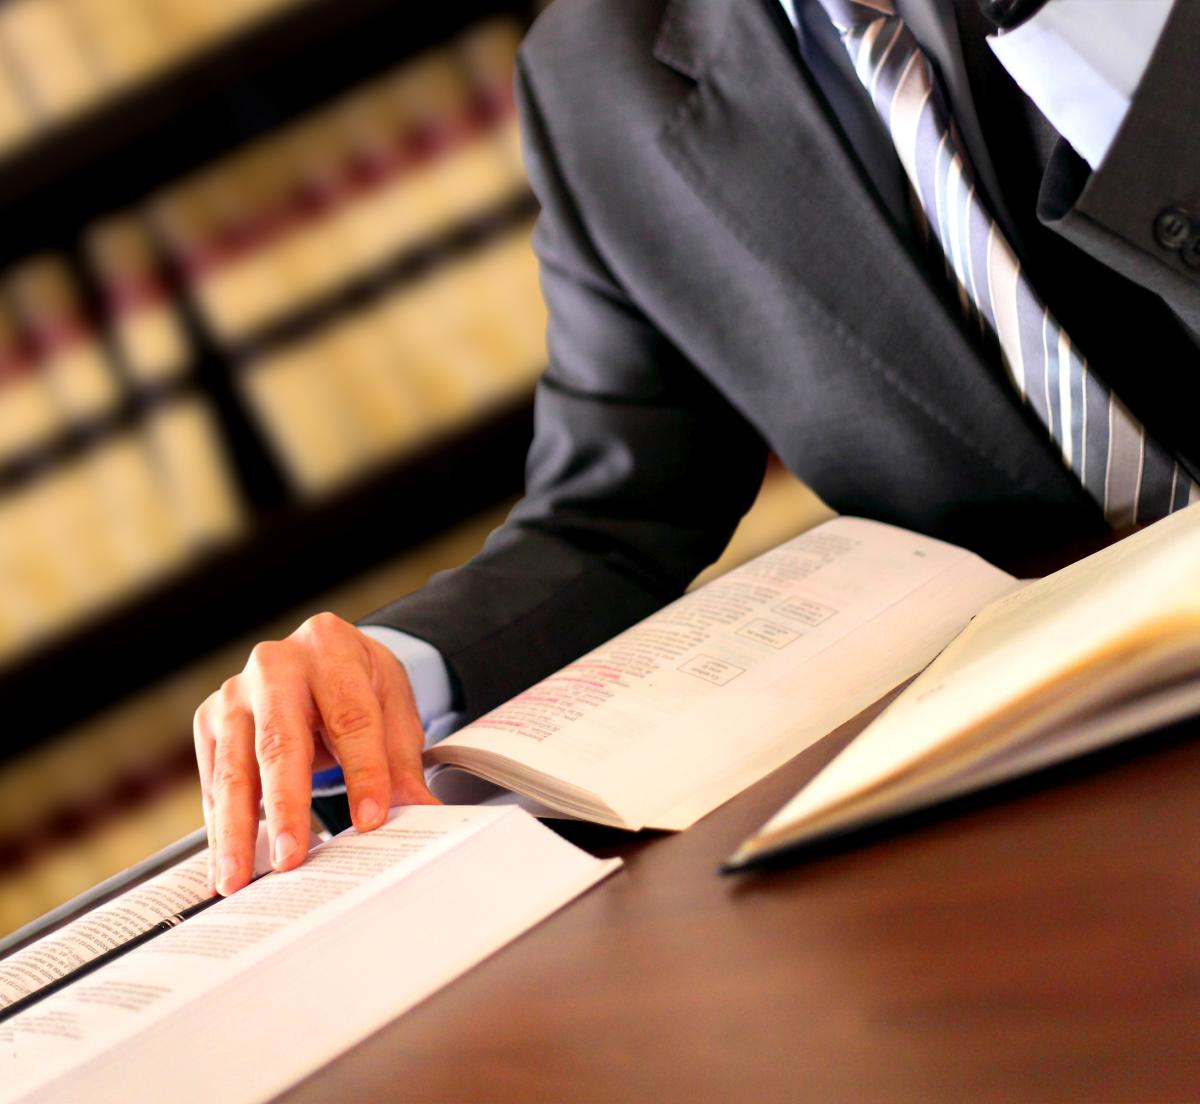 How To Choose and Hire a Tax Attorney